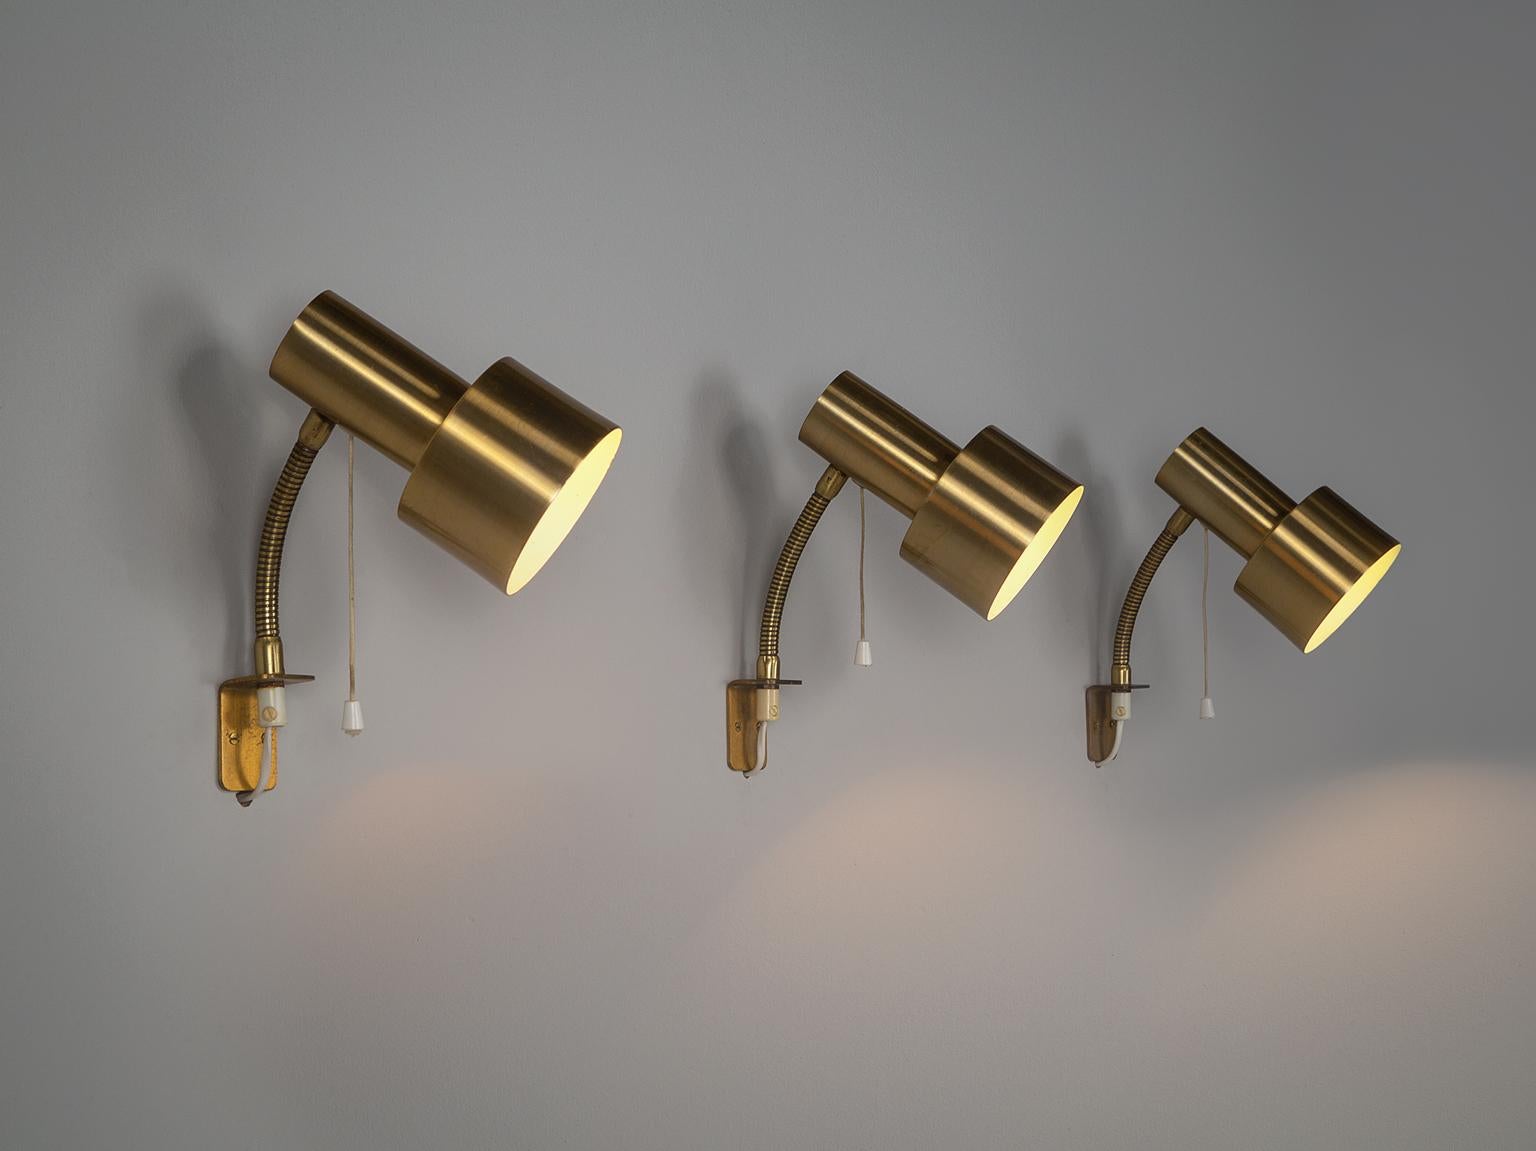 Large set of Swedish wall lamps with brass shades and adjustable stem, so both the wall and the surrounding room can be illuminated. 

Please note the price is per item.

